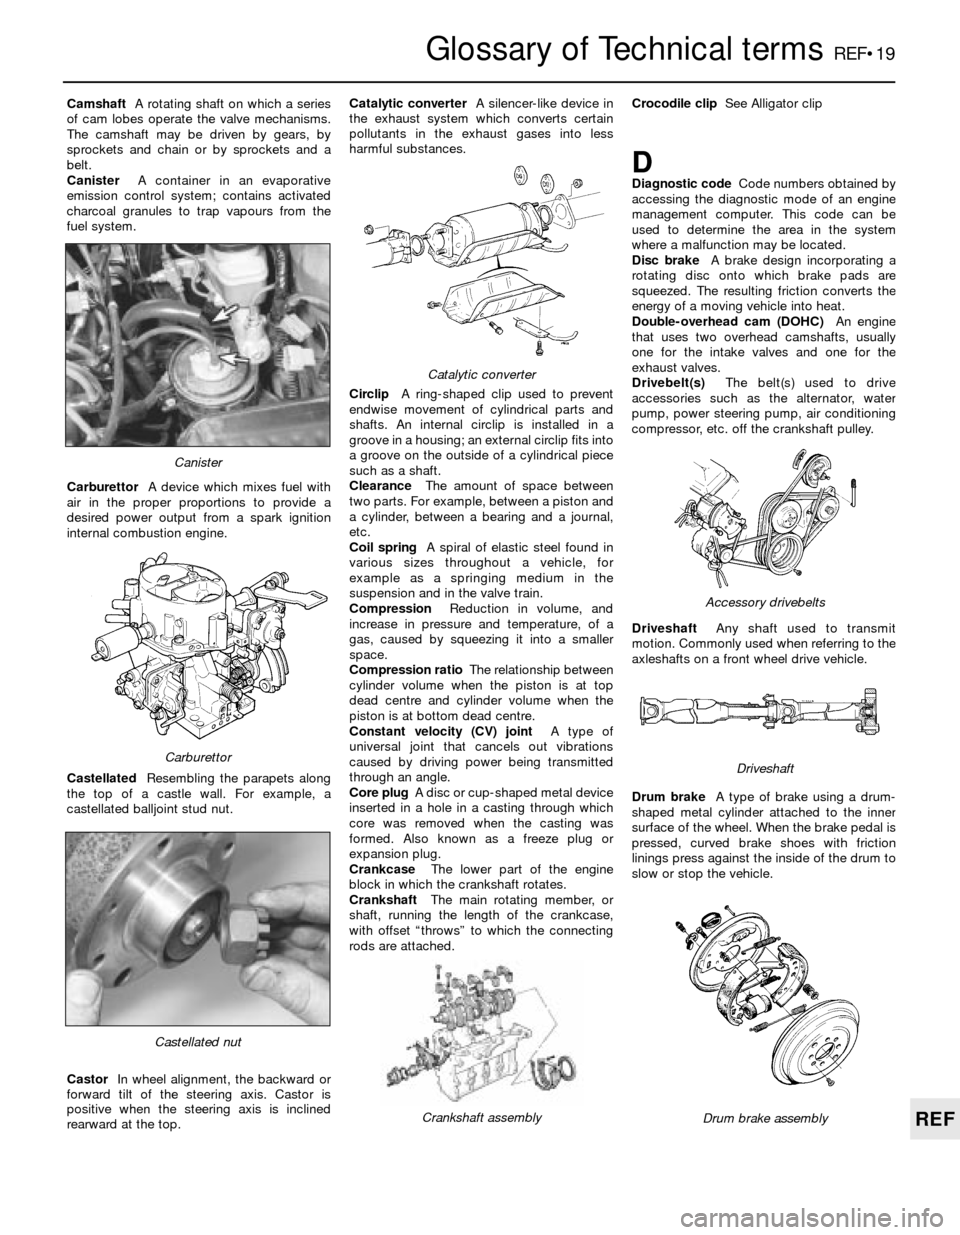 FORD SIERRA 1983 1.G Reference Workshop Manual Glossary of Technical termsREF•19
REF
CamshaftA rotating shaft on which a series
of cam lobes operate the valve mechanisms.
The camshaft may be driven by gears, by
sprockets and chain or by sprocket